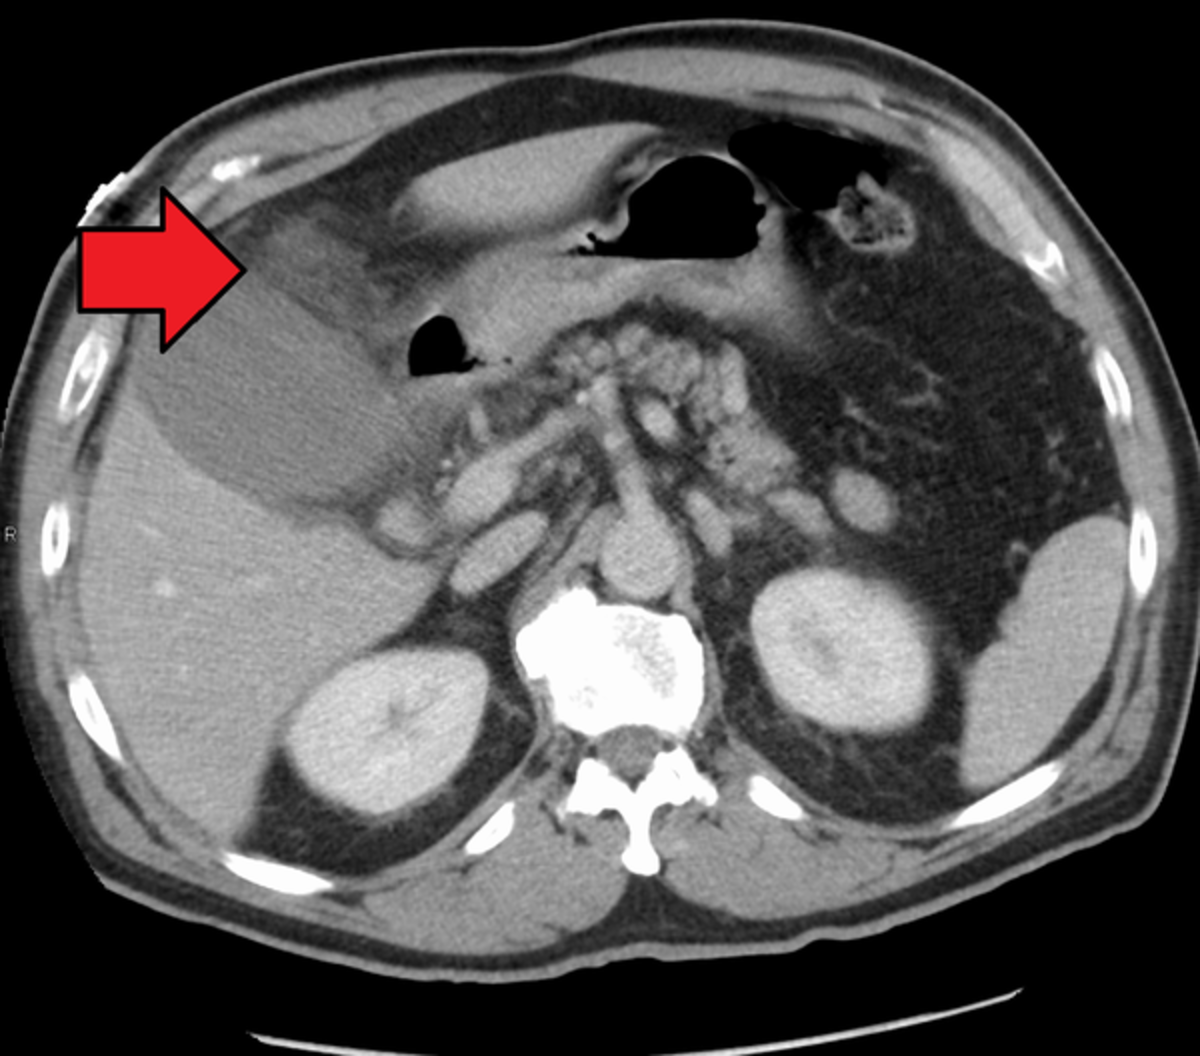 Acute cholecystitis as seen on CT. Note the fat stranding around the enlarged gallbladder. 